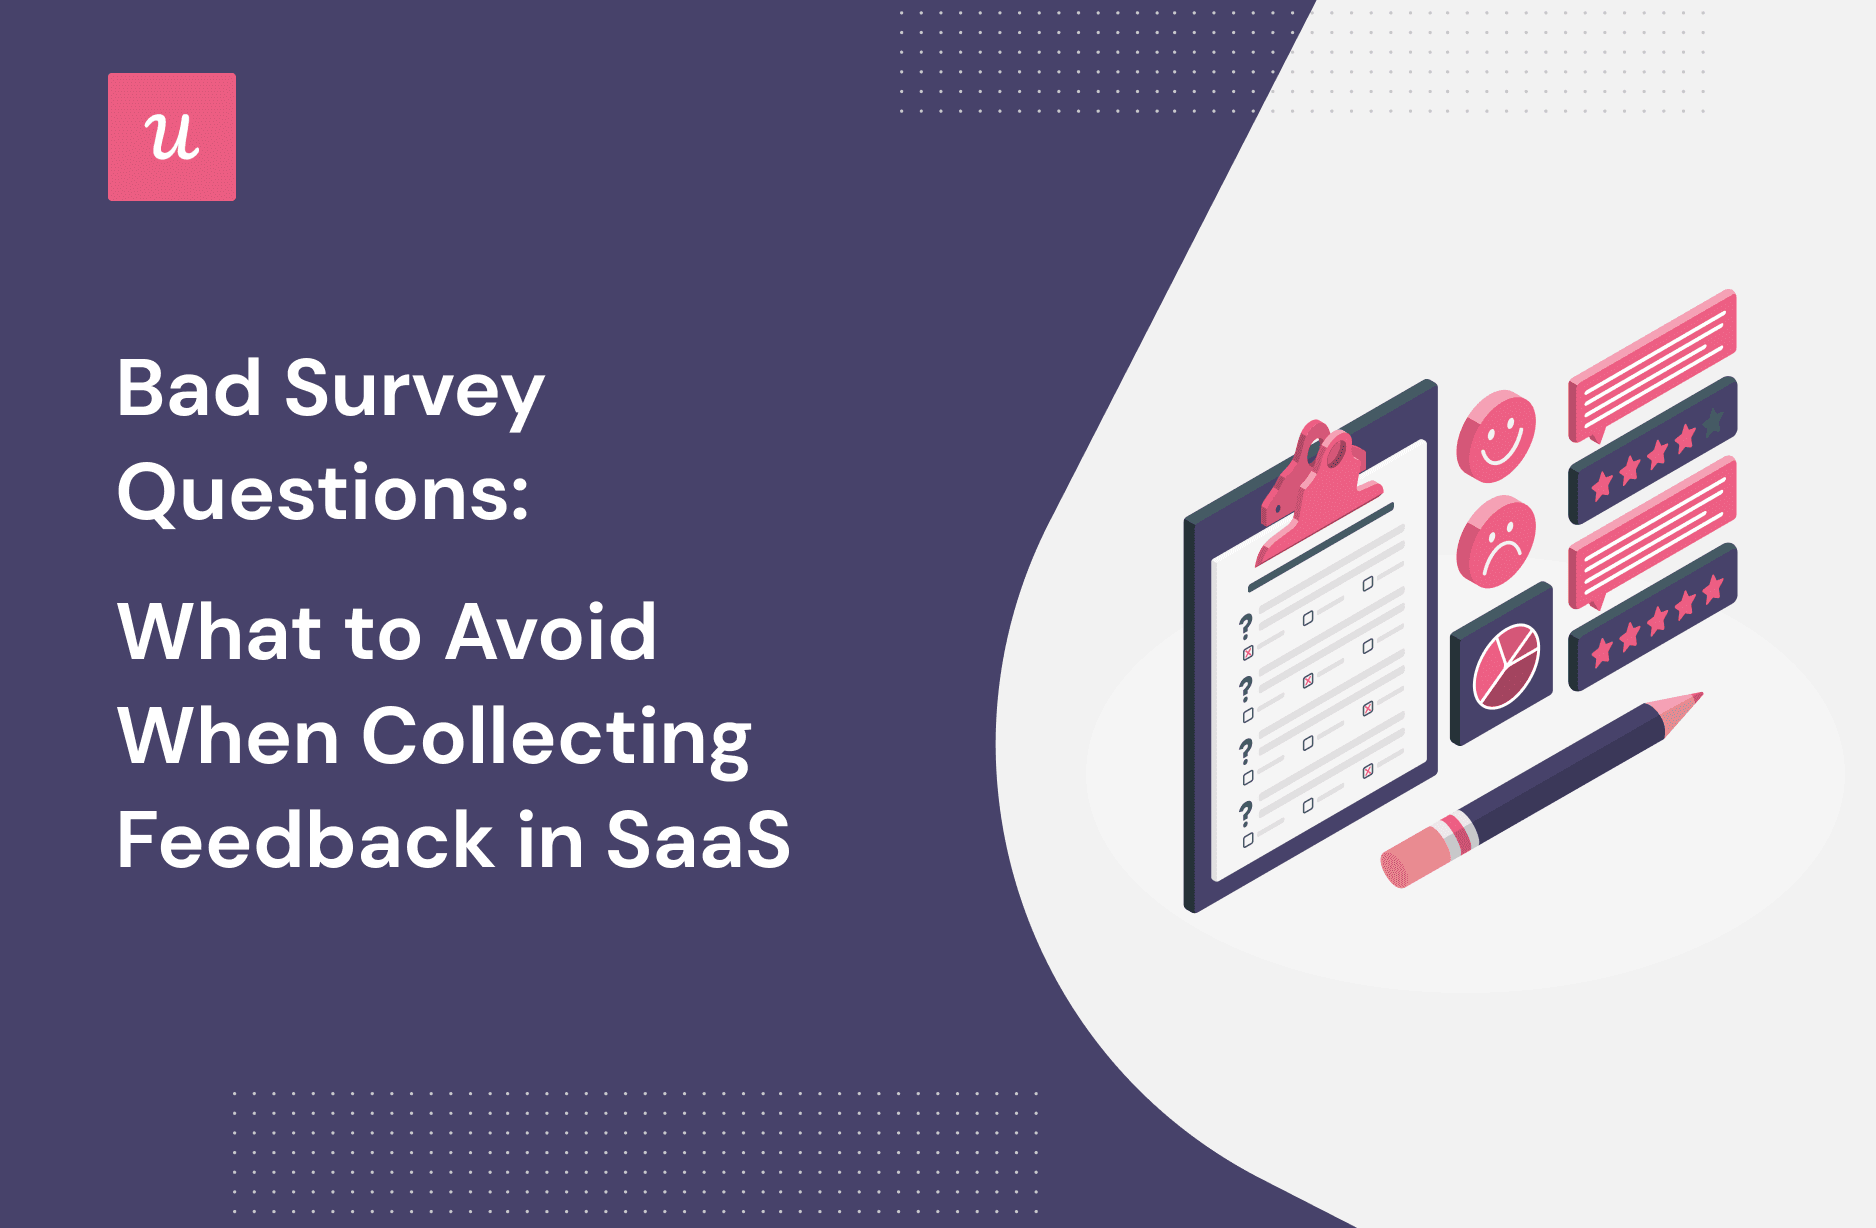 Bad Survey Questions: What to Avoid When Collecting Feedback in SaaS cover